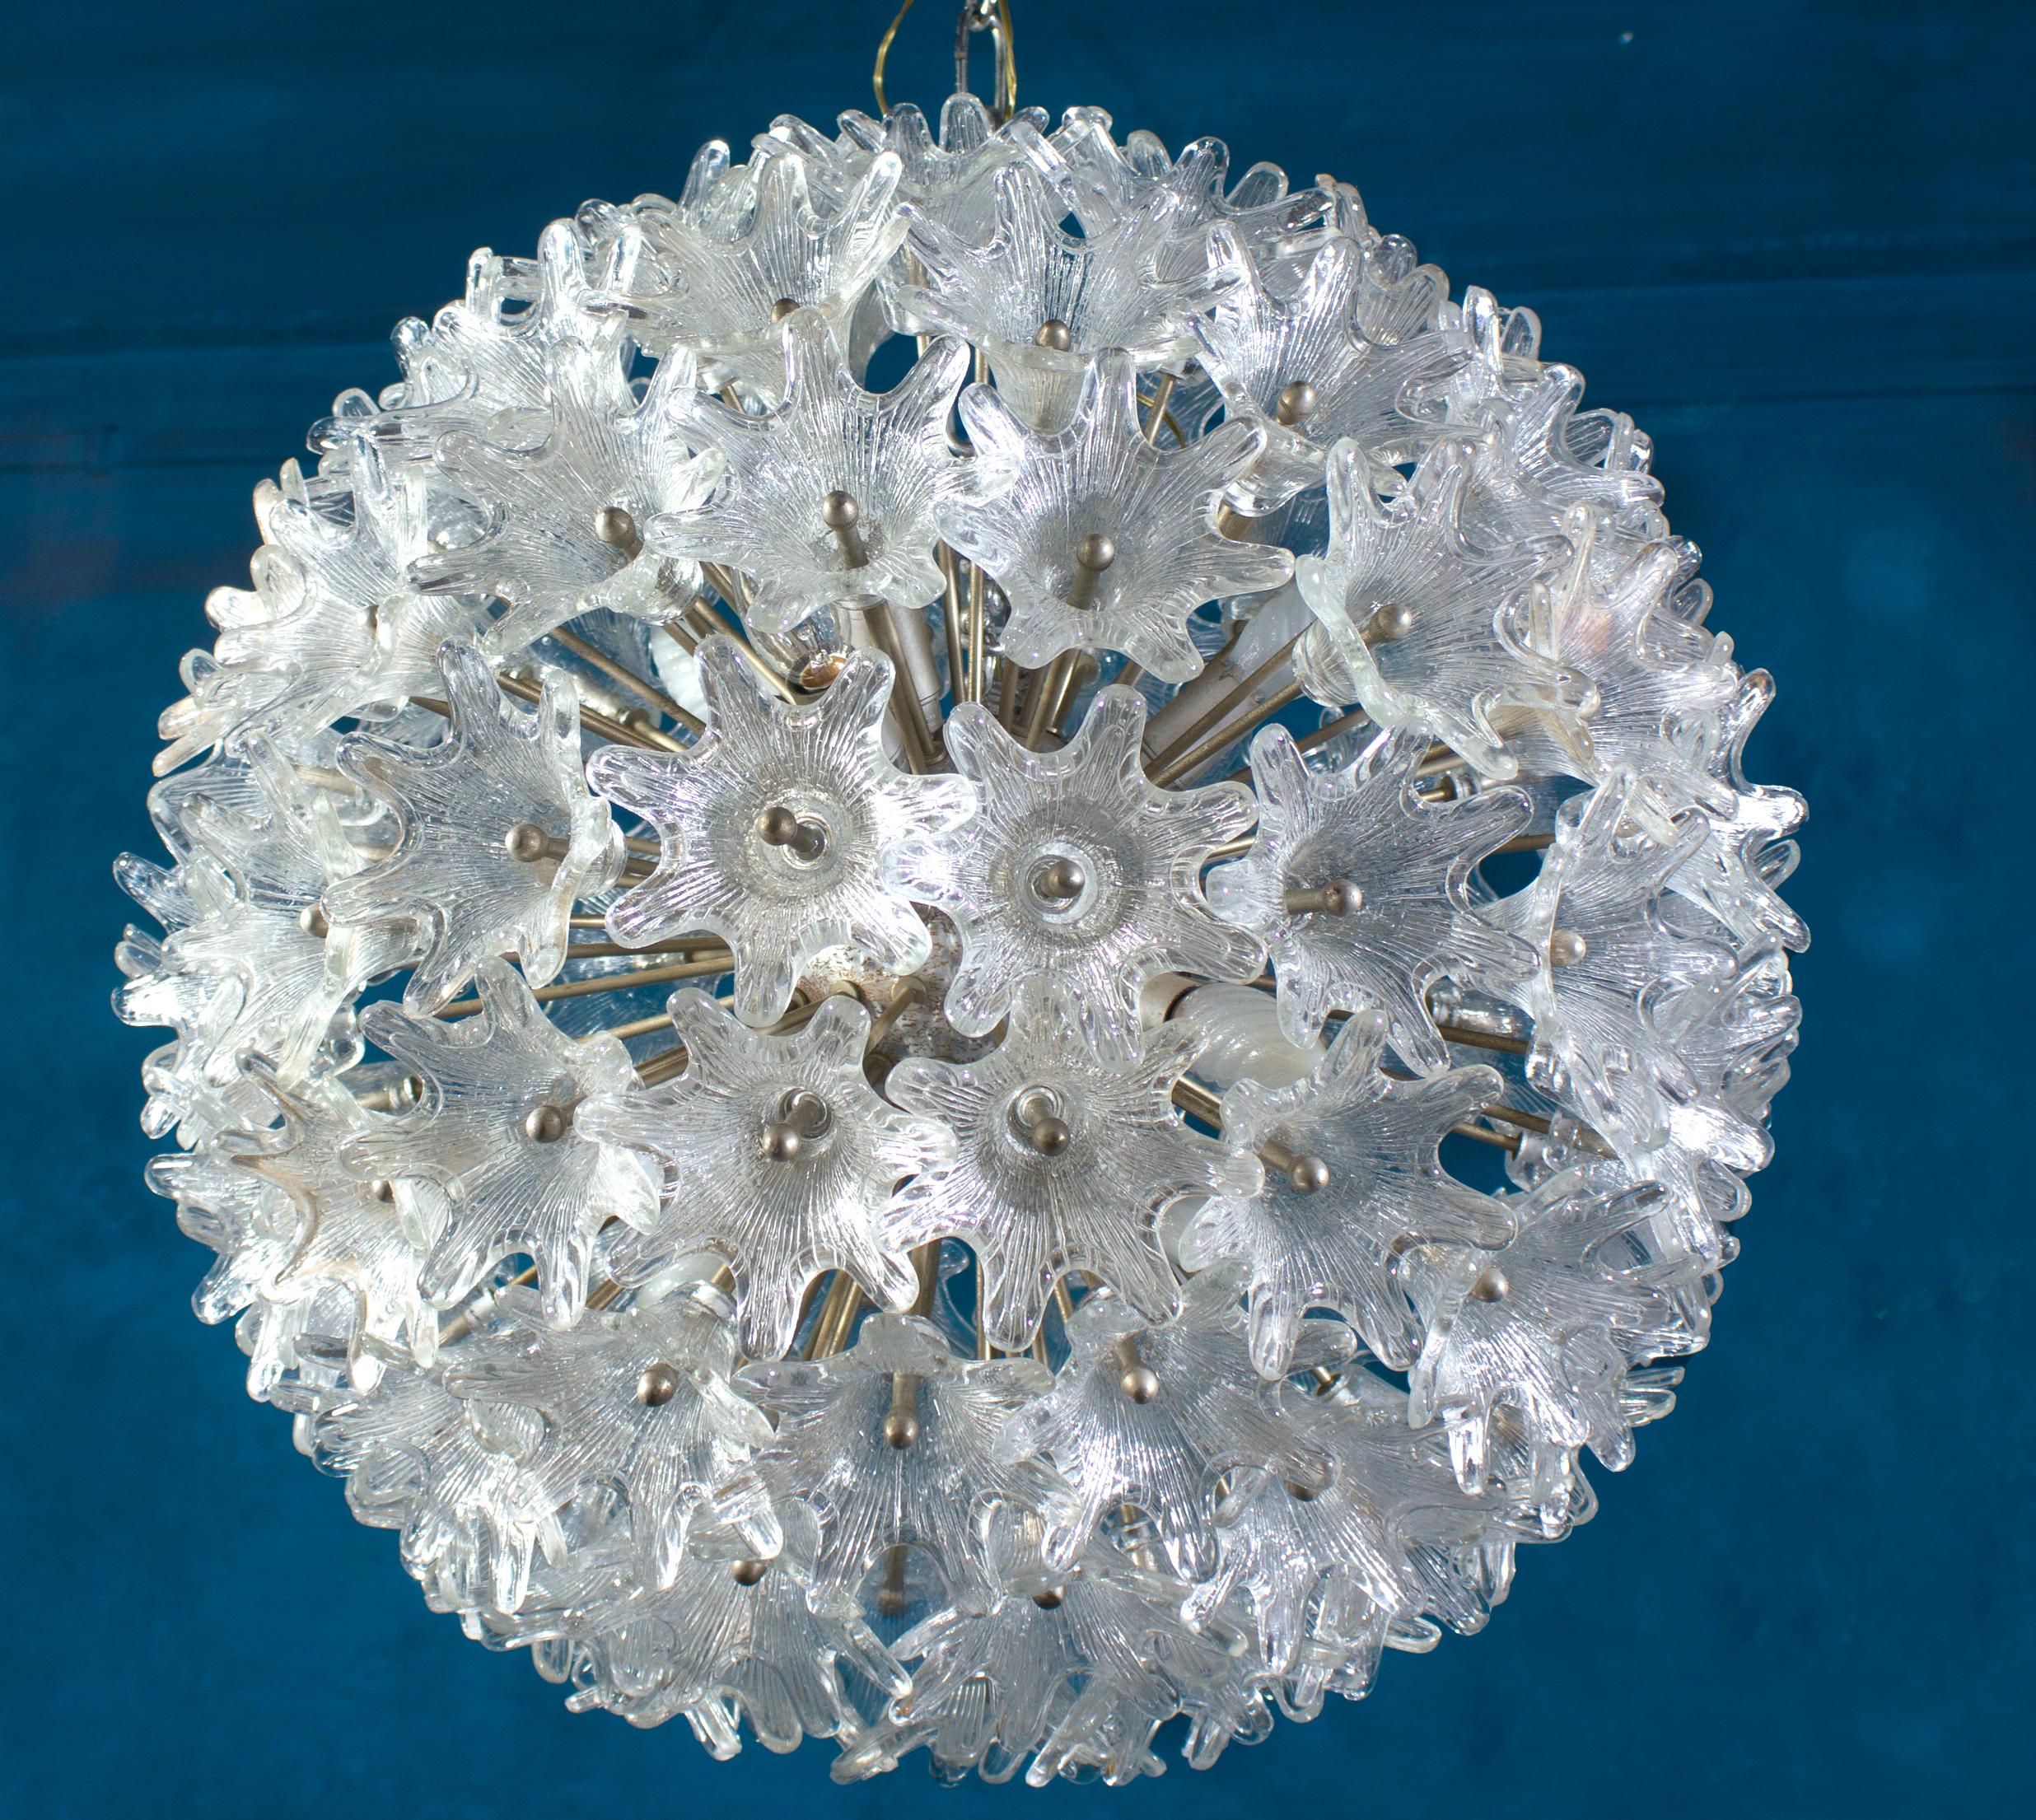 Sputnik flower Murano glass chandelier by Paolo Venini for VeArt, Italy. Covered in molded ice structure glass flower on a chrome Sputnik frame. 
A beautiful clear natural look like a jewel in your living room. In good original condition with minor